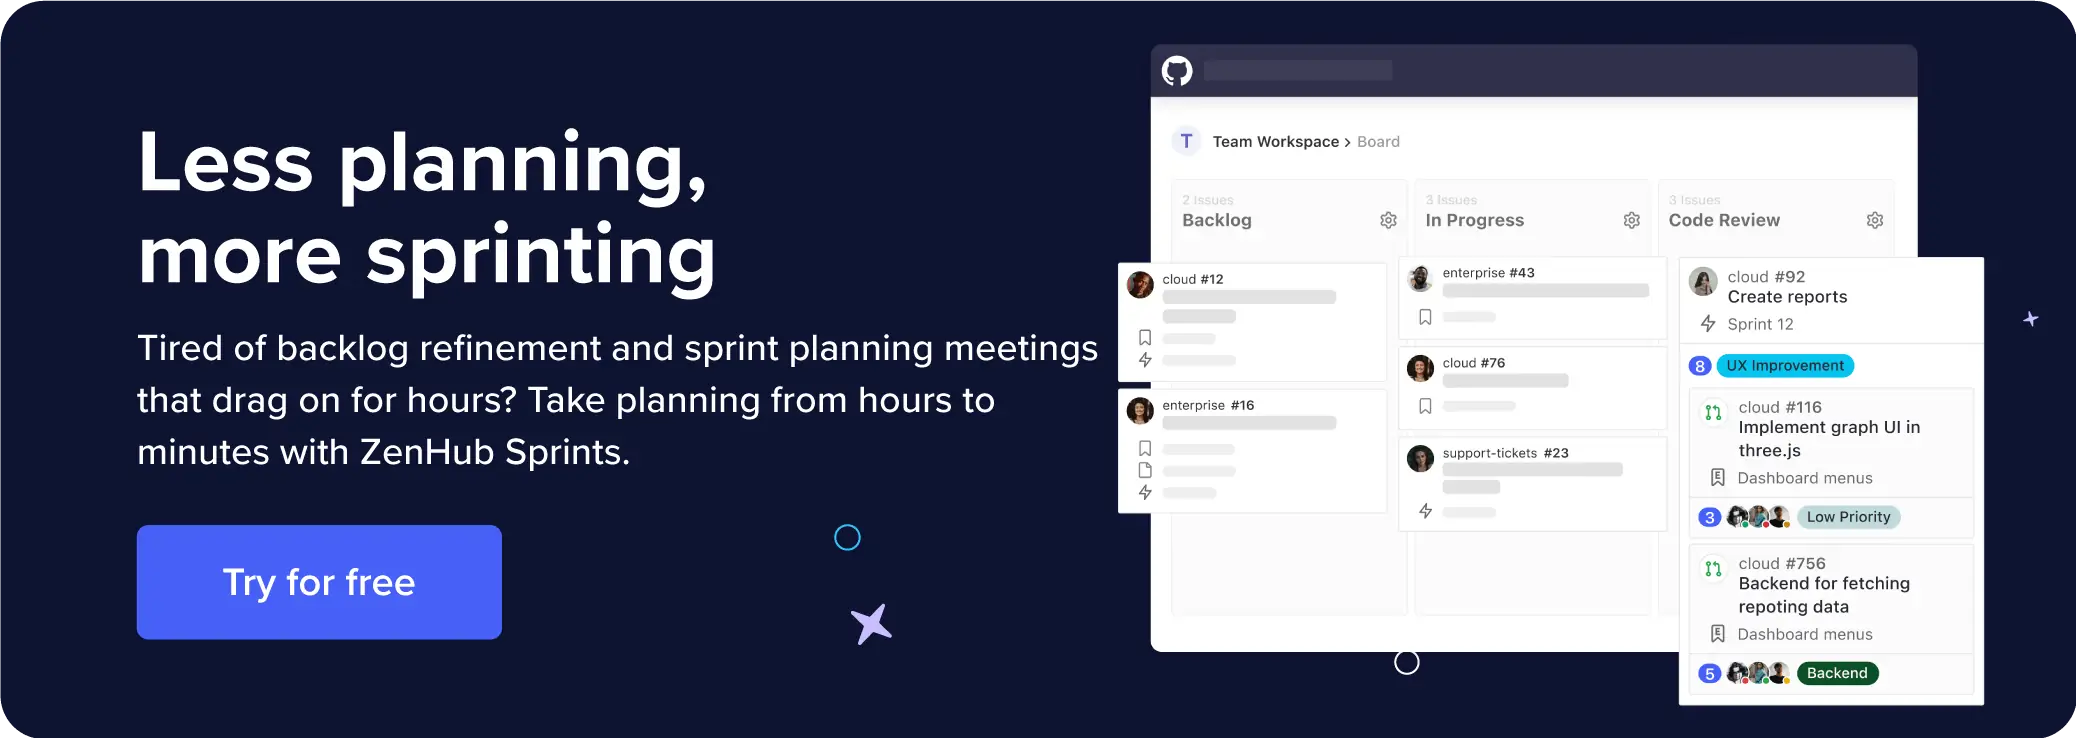 Goes over how to take sprint planning from hours to minutes with ZenHub Sprints.